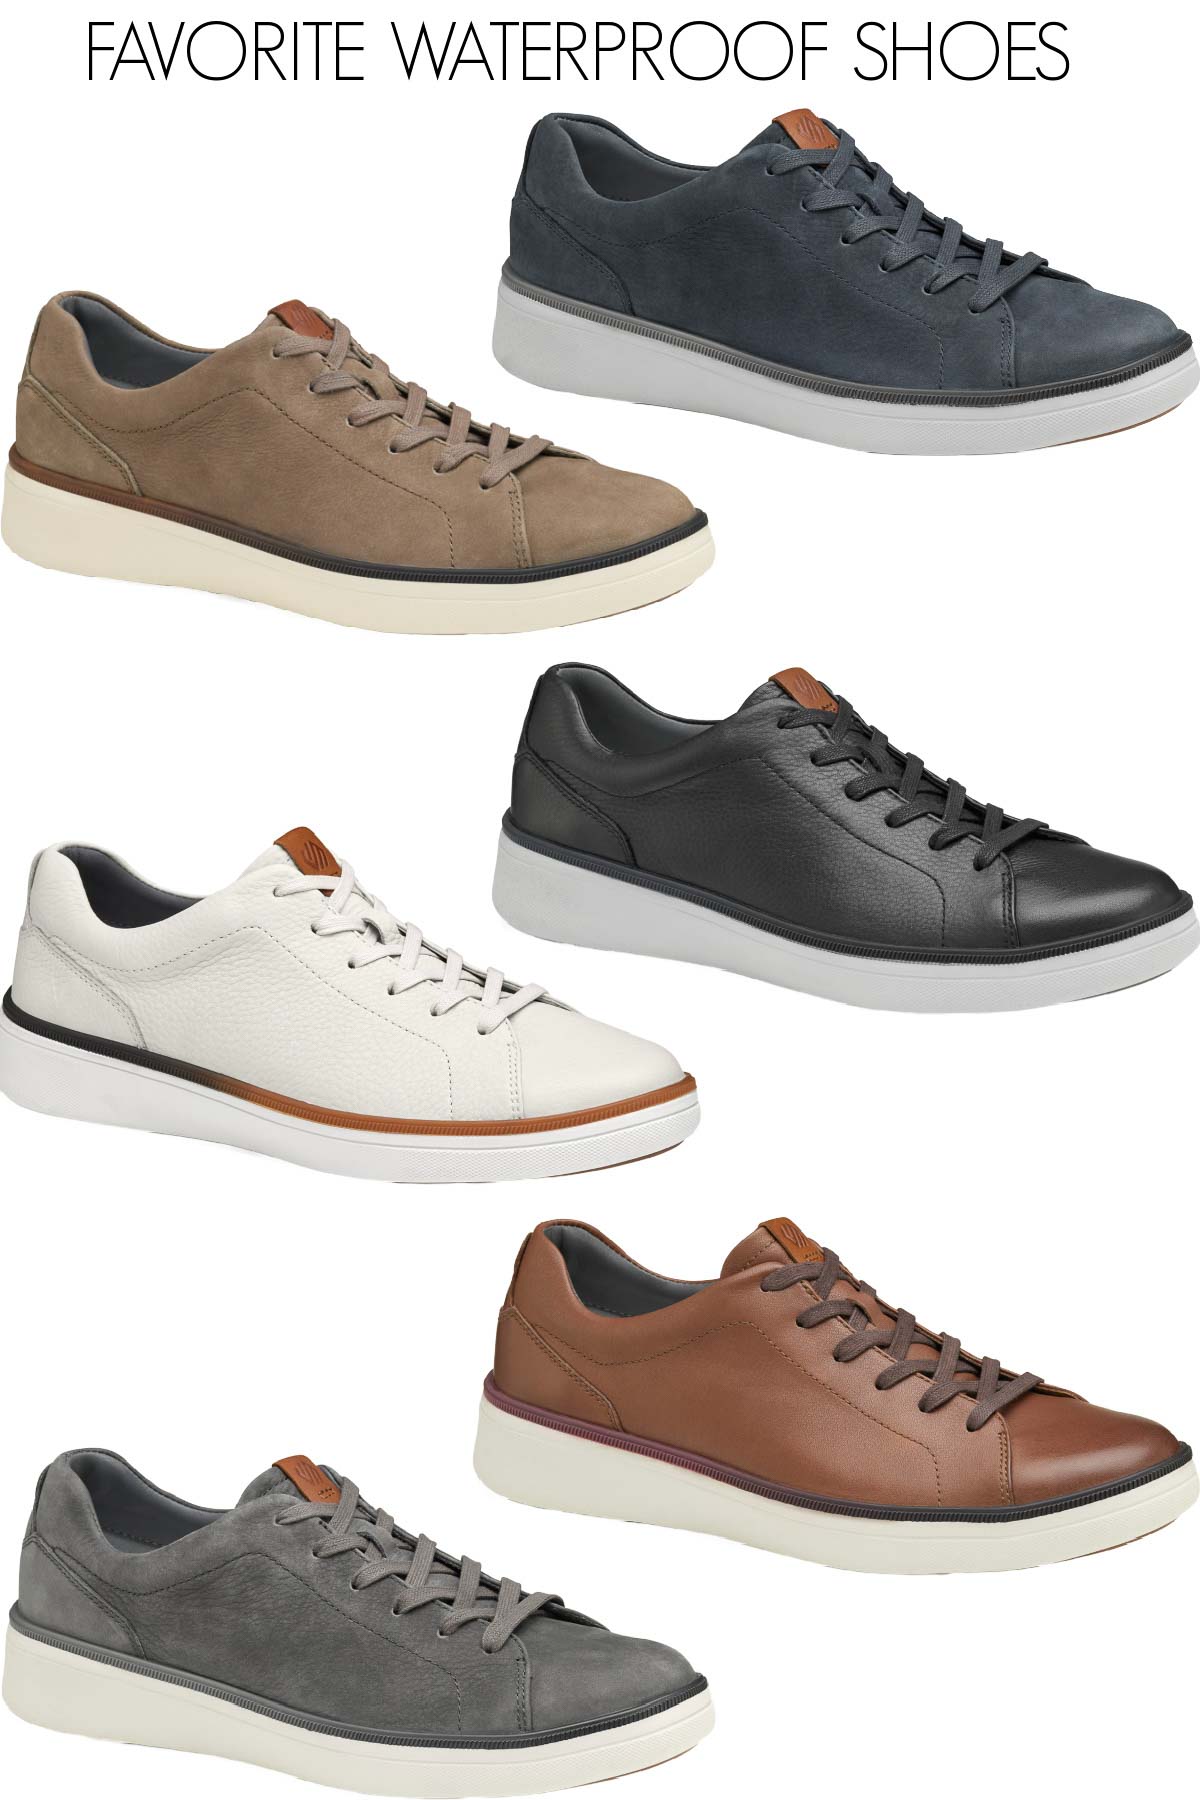 Favorite waterproof shoes for men in all color options